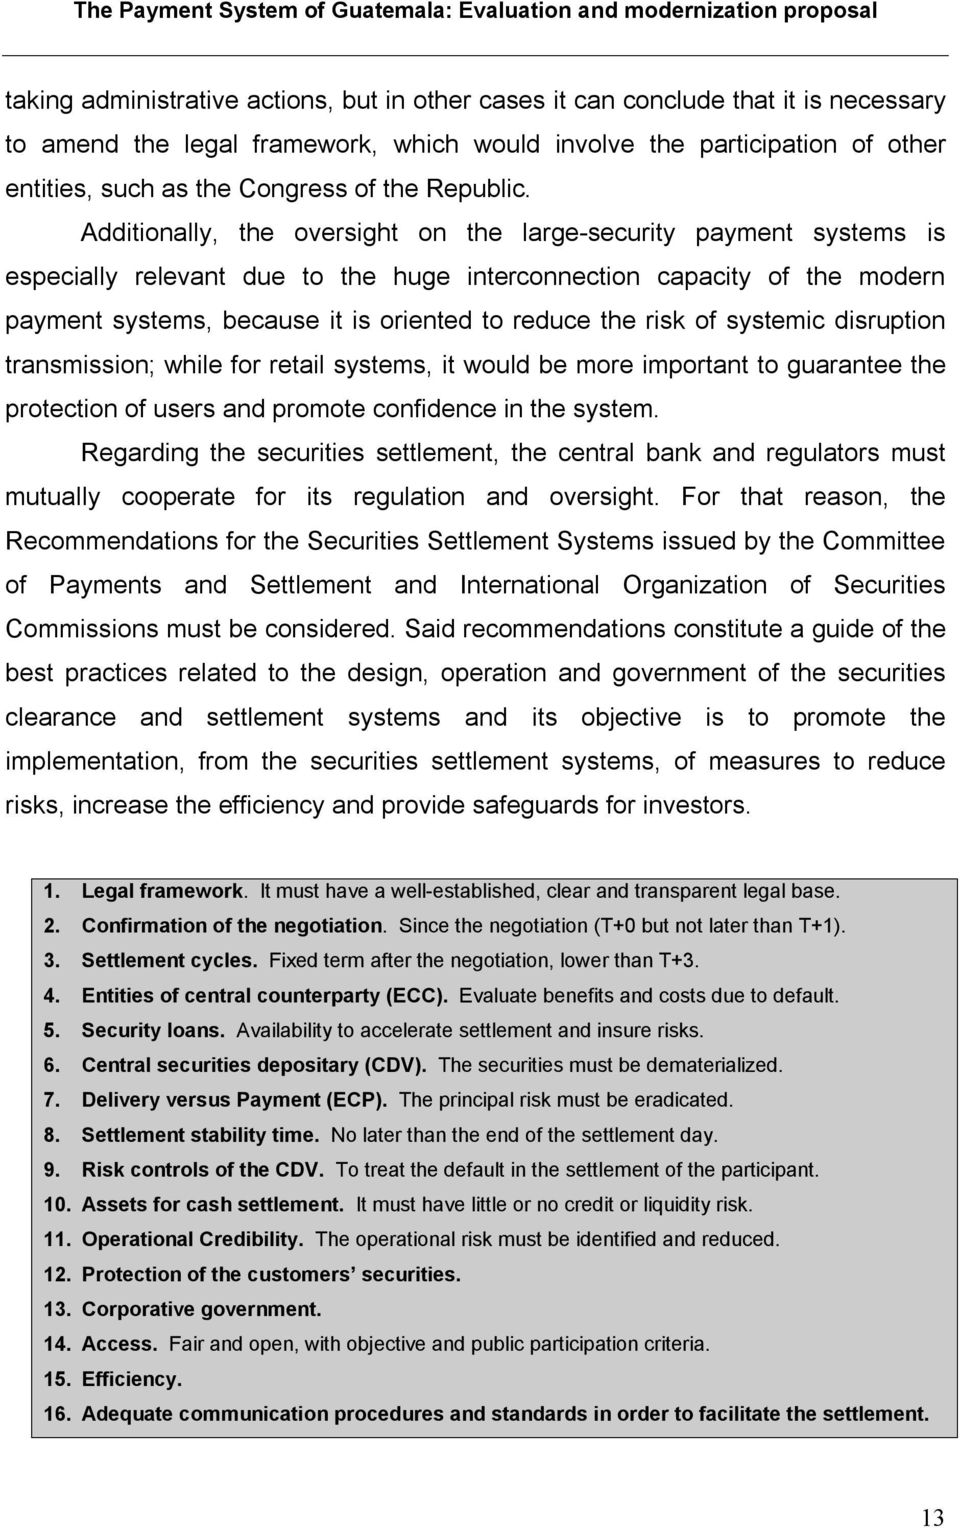 Additionally, the oversight on the large-security payment systems is especially relevant due to the huge interconnection capacity of the modern payment systems, because it is oriented to reduce the